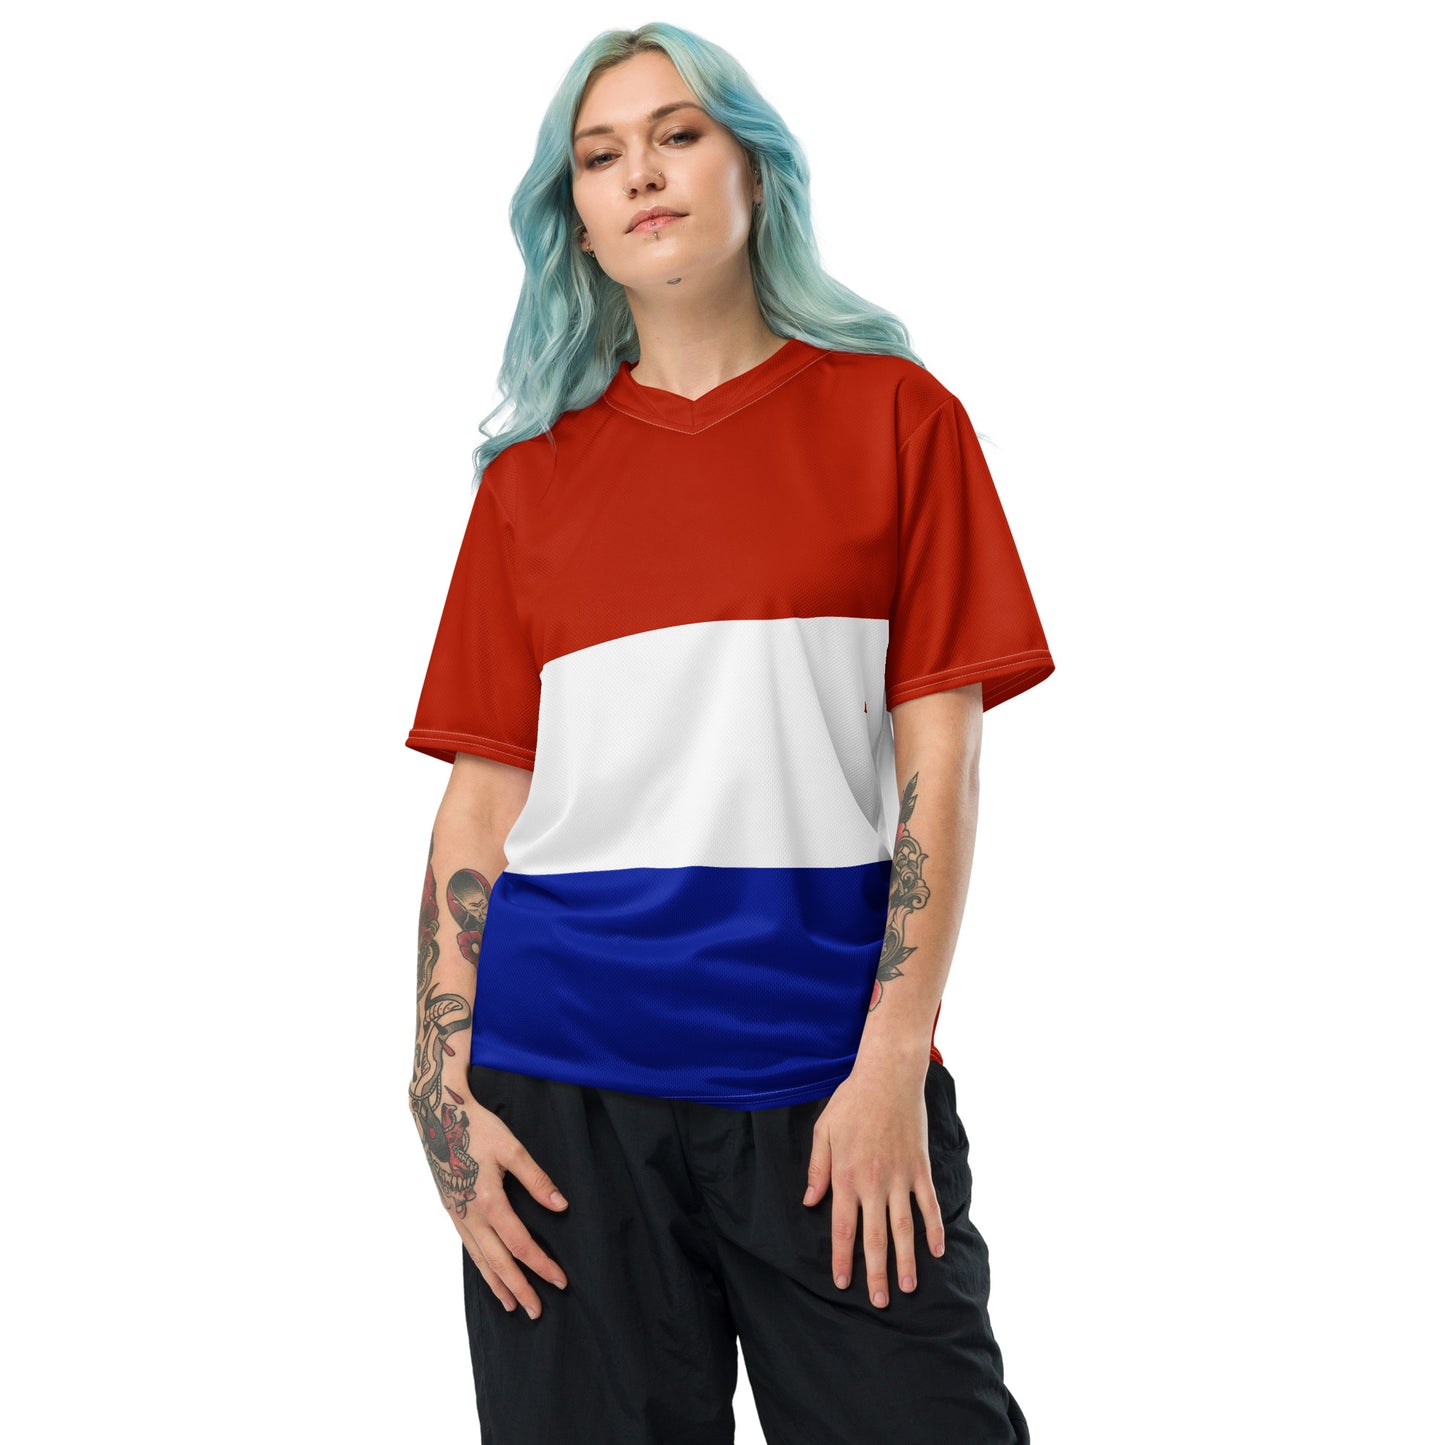 Netherlands Flag T-shirt - Celebrating King's Day in style (red, white, blue)